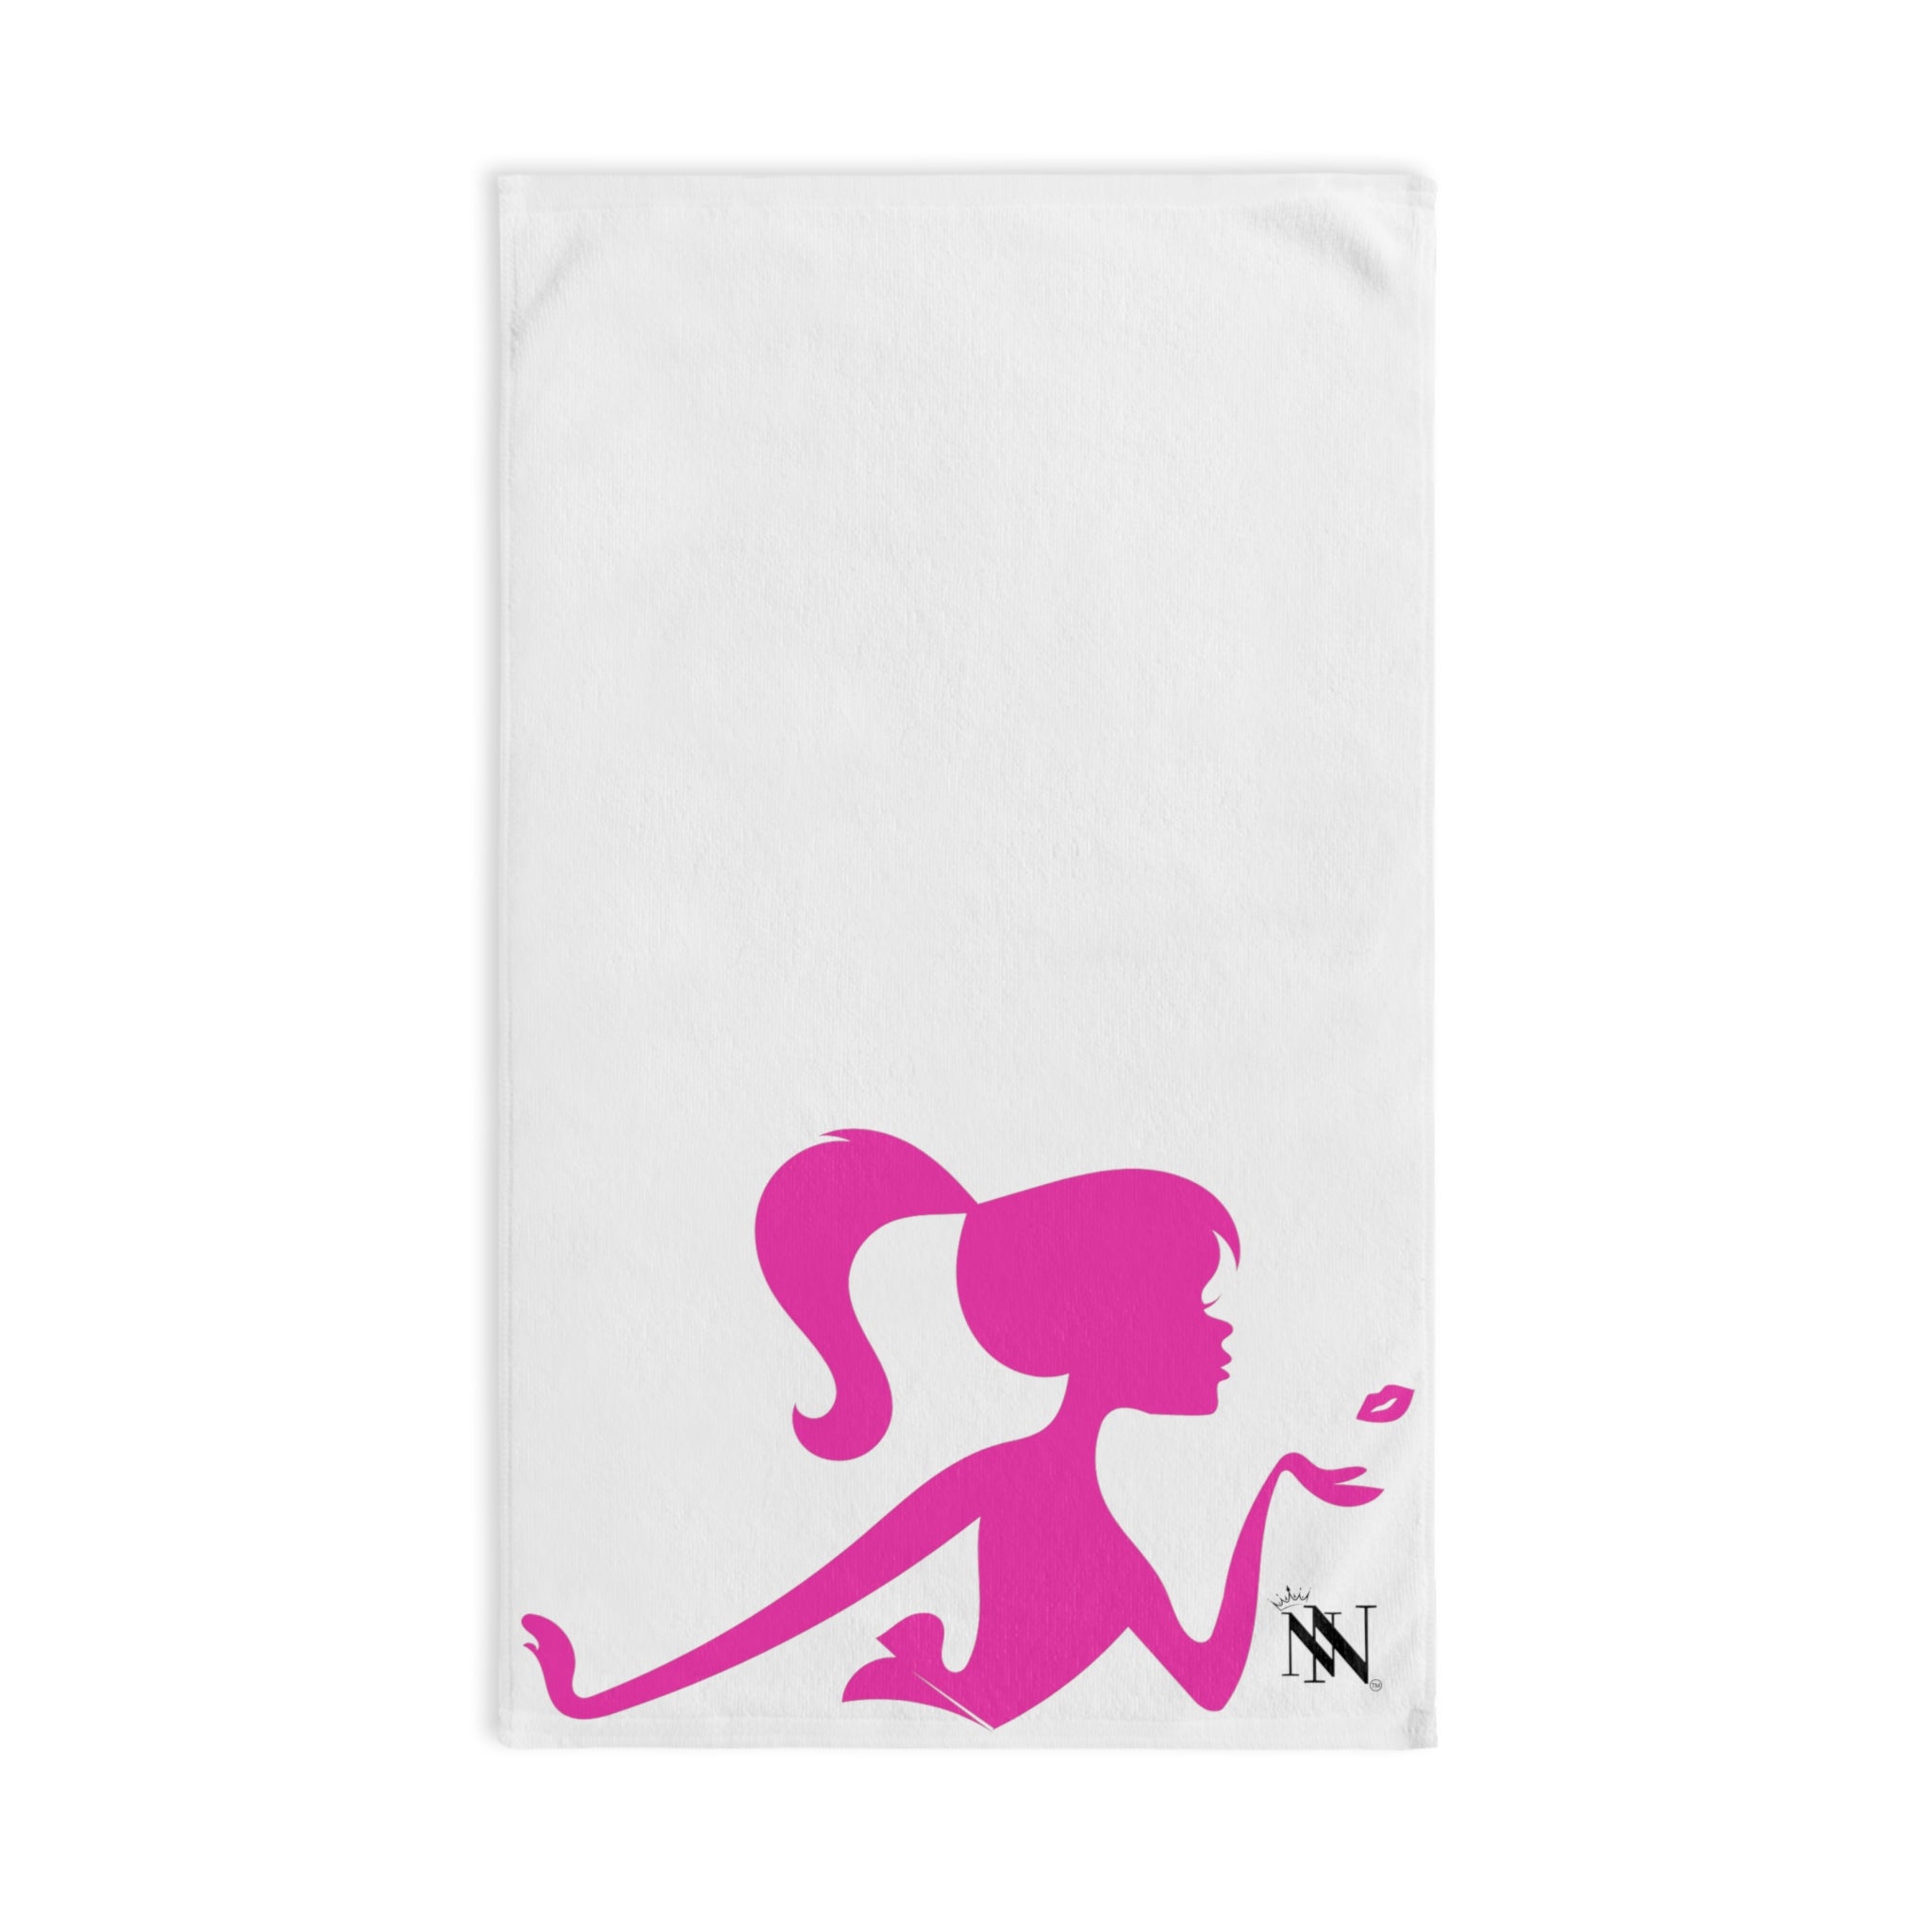 Baby Kiss Doll | Nectar Napkins Fun-Flirty Lovers' After Sex Towels NECTAR NAPKINS